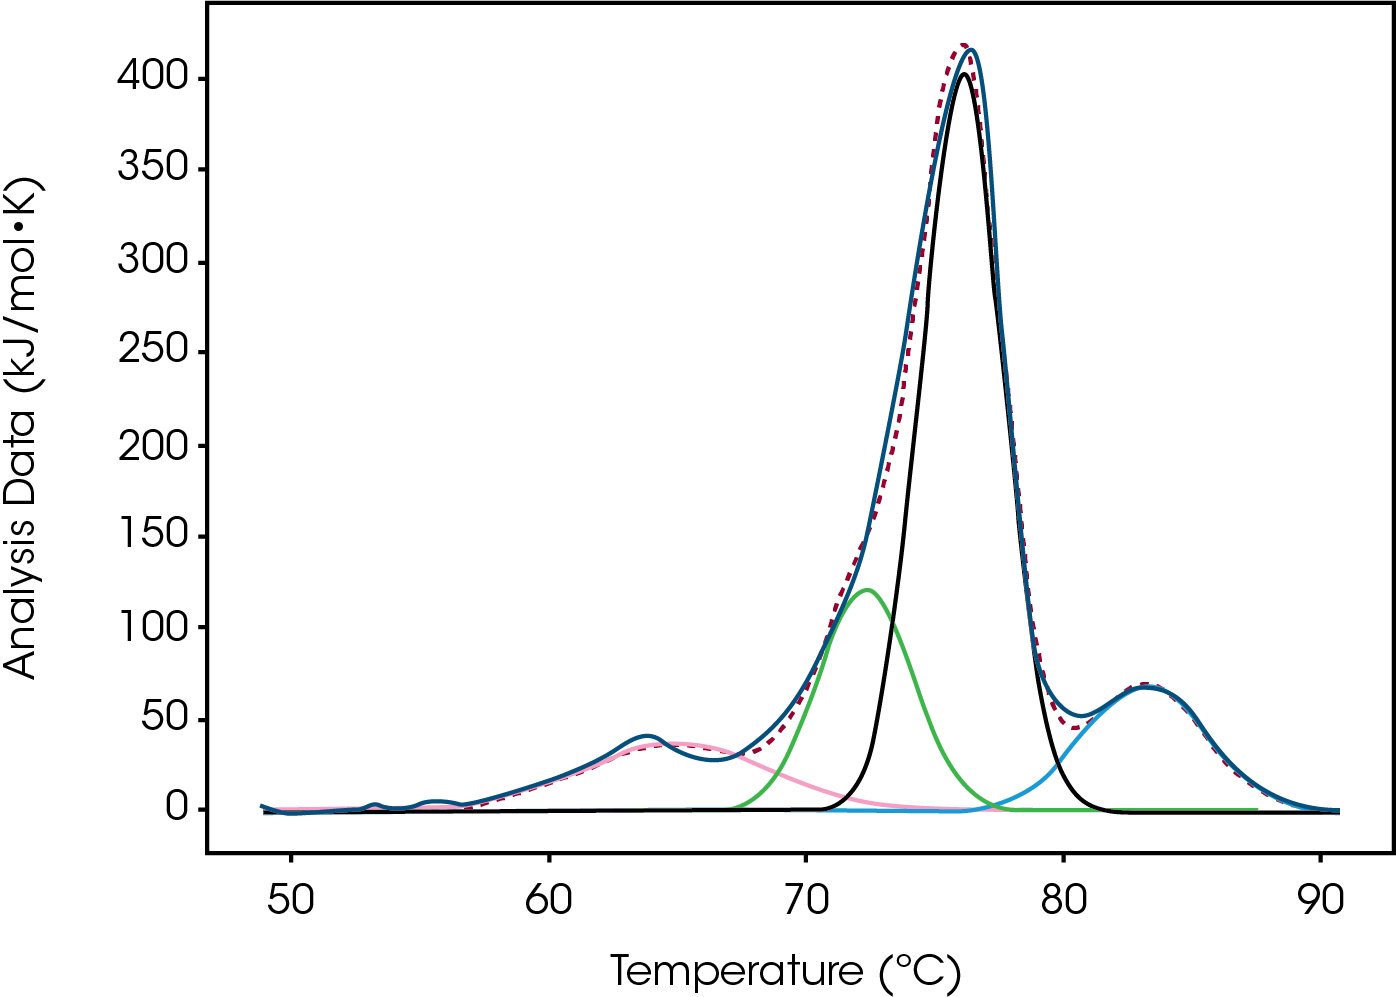 Figure 5. Conjugate Type I, High, fitted with four Gaussians. The red trace is identified as Peak 1.